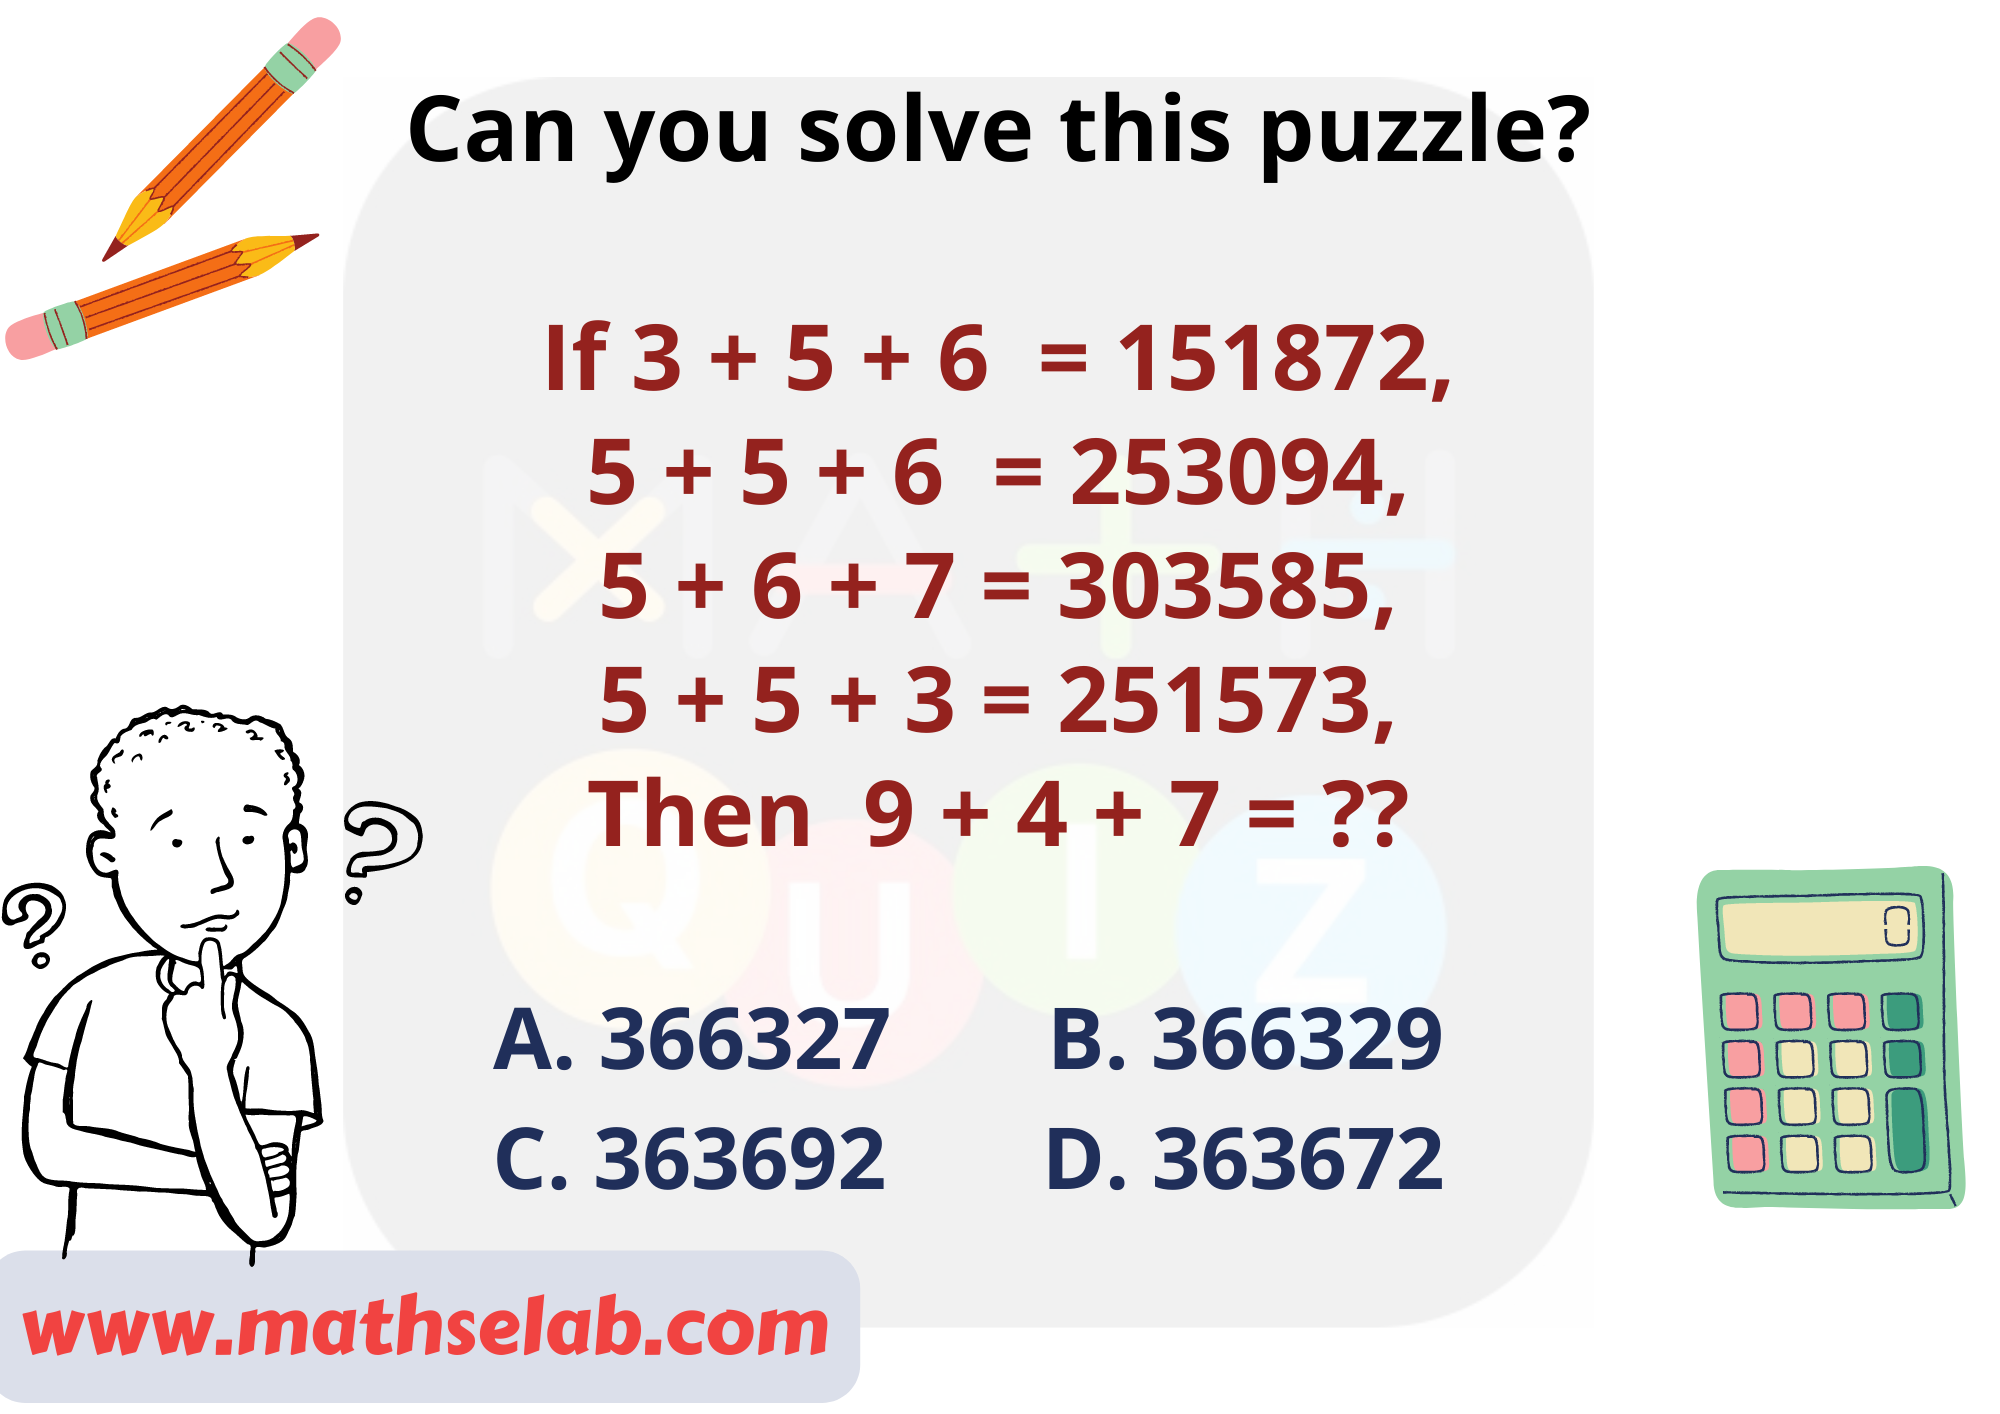 Can you solve this puzzle If 3 + 5 + 6 = 151872, 5 + 5 + 6 = 253094, 5 + 6 + 7 = 303585, 5 + 5 + 3 = 251573, Then 9 + 4 + 7 = - www.mathselab.com